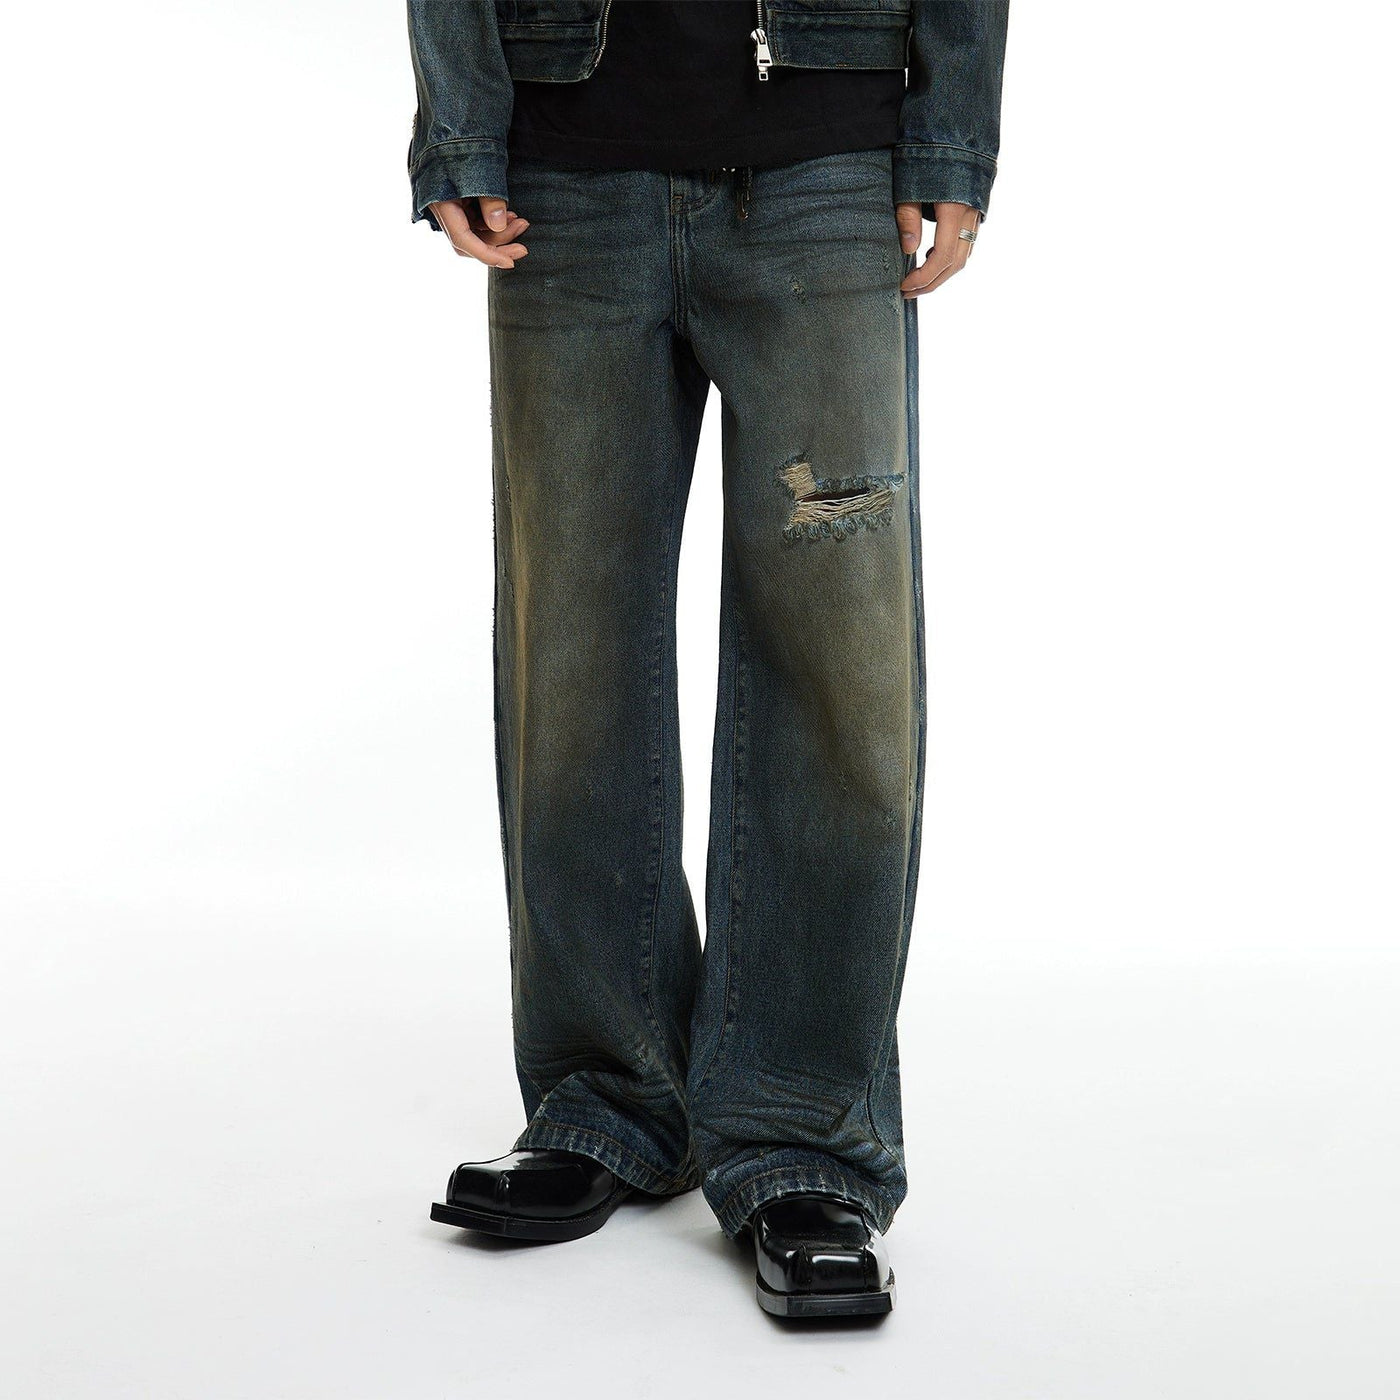 Ripped and Washed Jeans Korean Street Fashion Jeans By Roaring Wild Shop Online at OH Vault